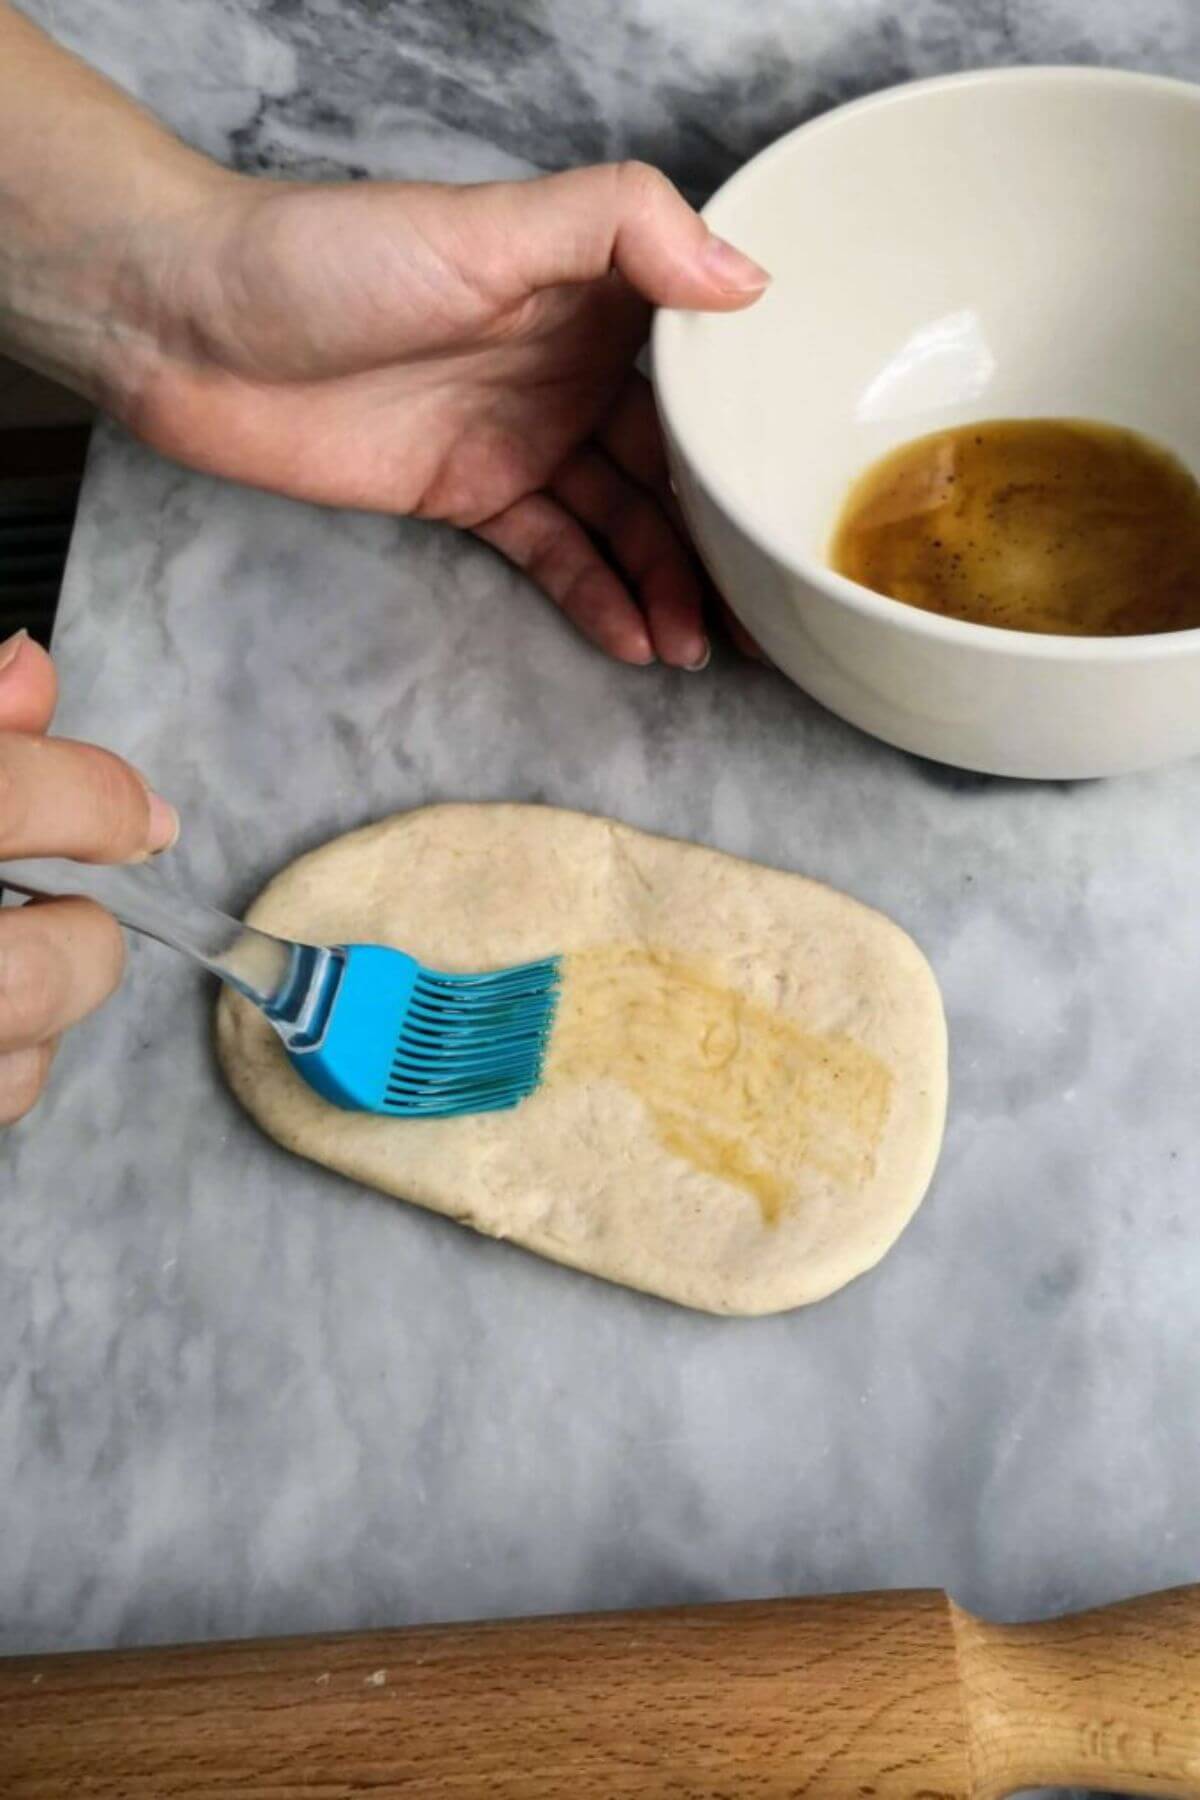 Sesame oil being brushed onto one side of bao bun dough with a blue pastry brush.